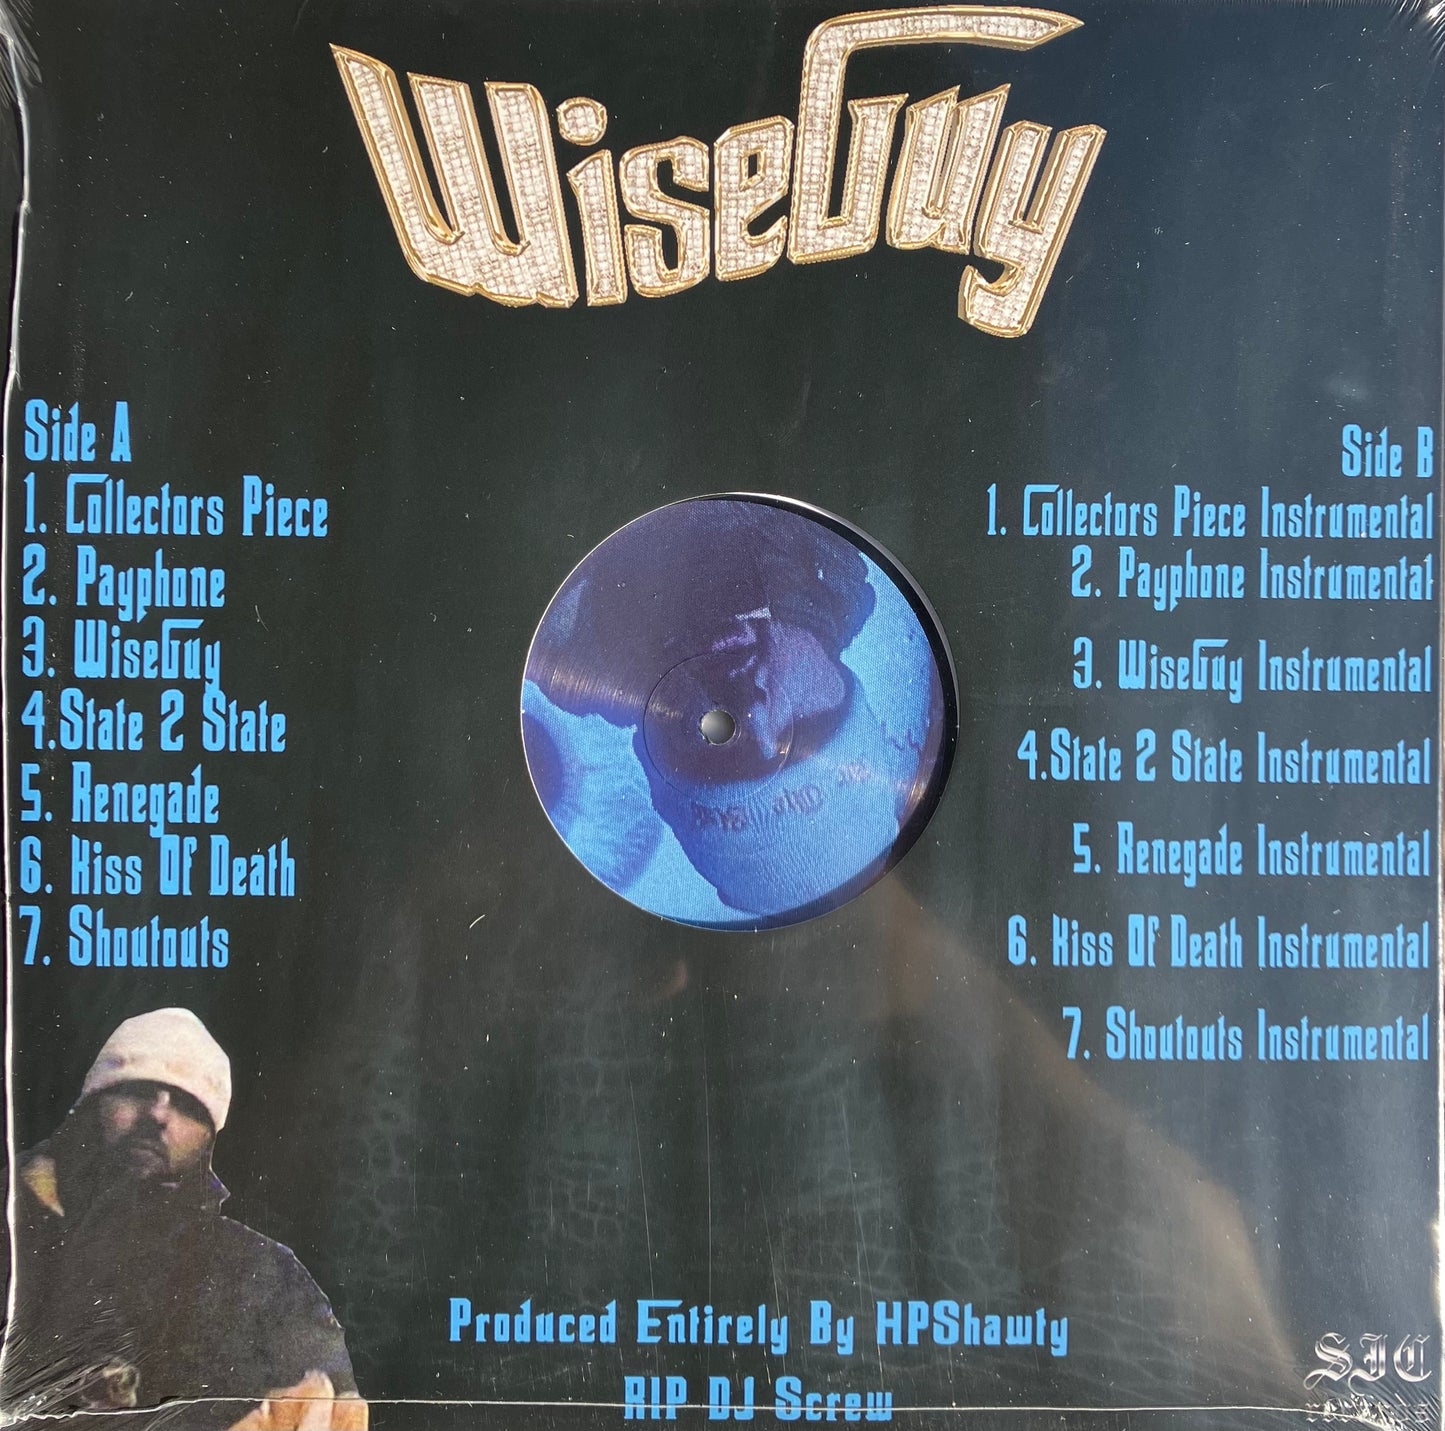 WISEGUY PHYSICALS